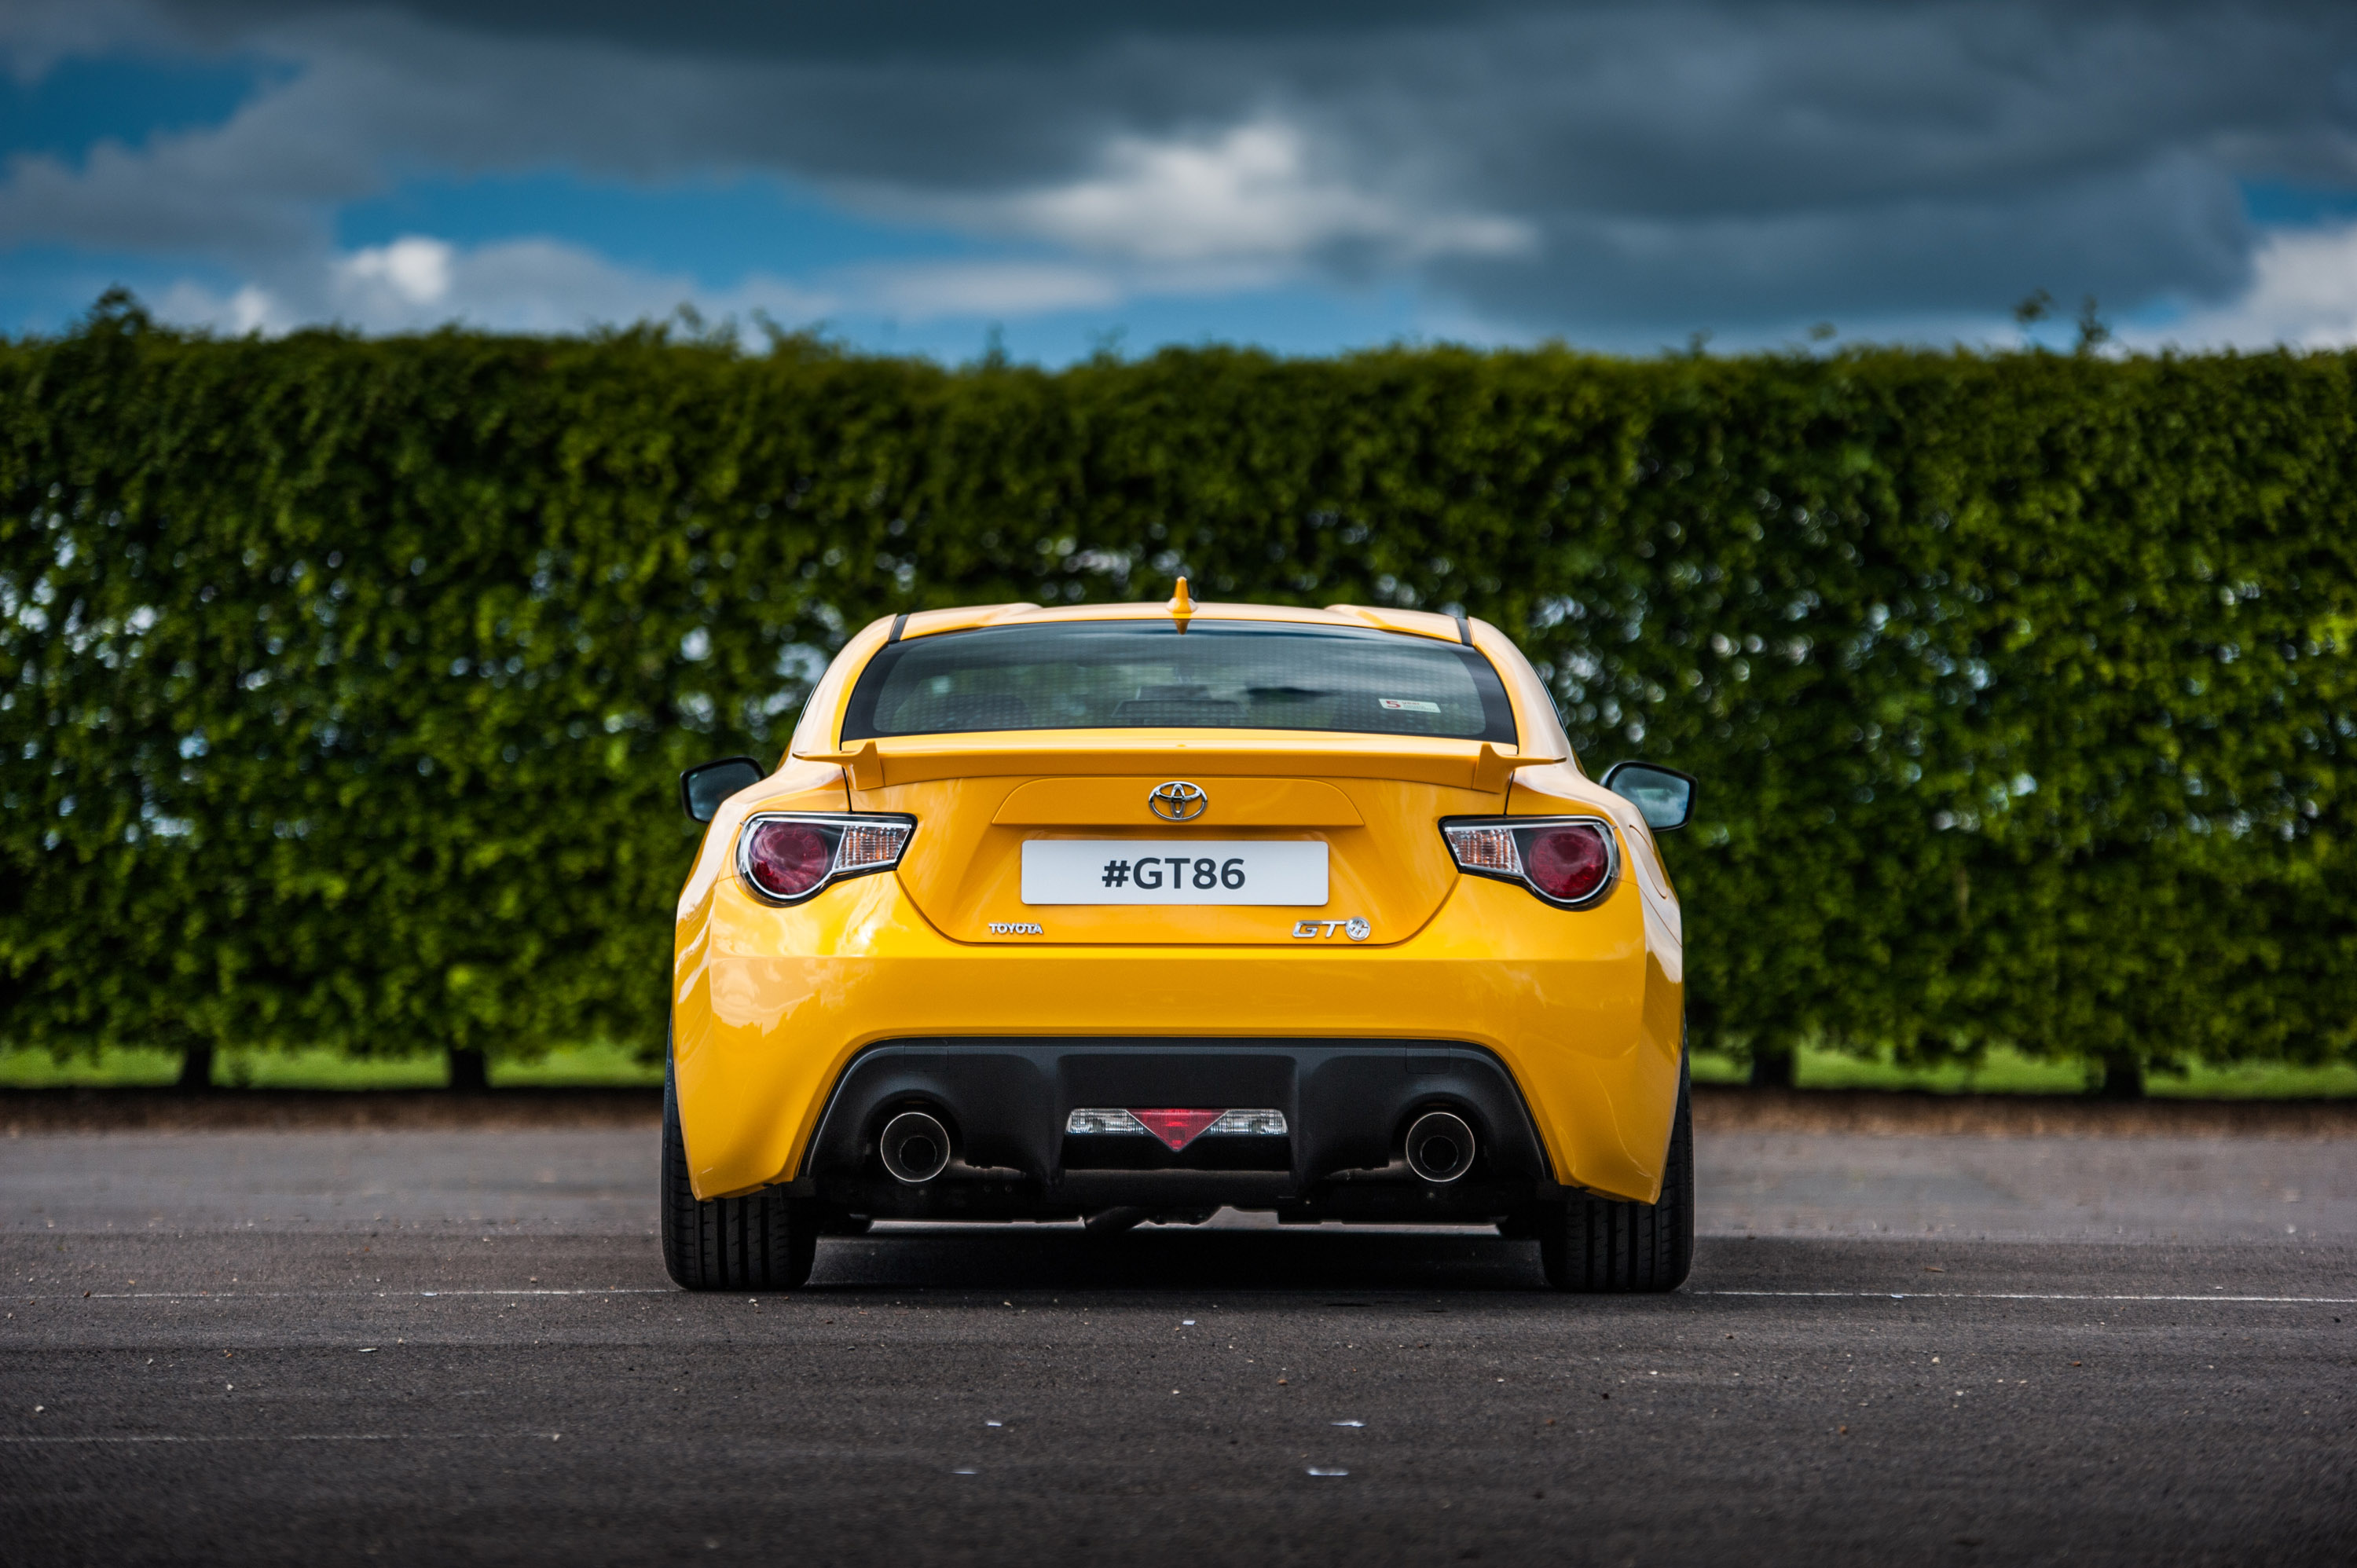 Toyota GT86 in classic liveries